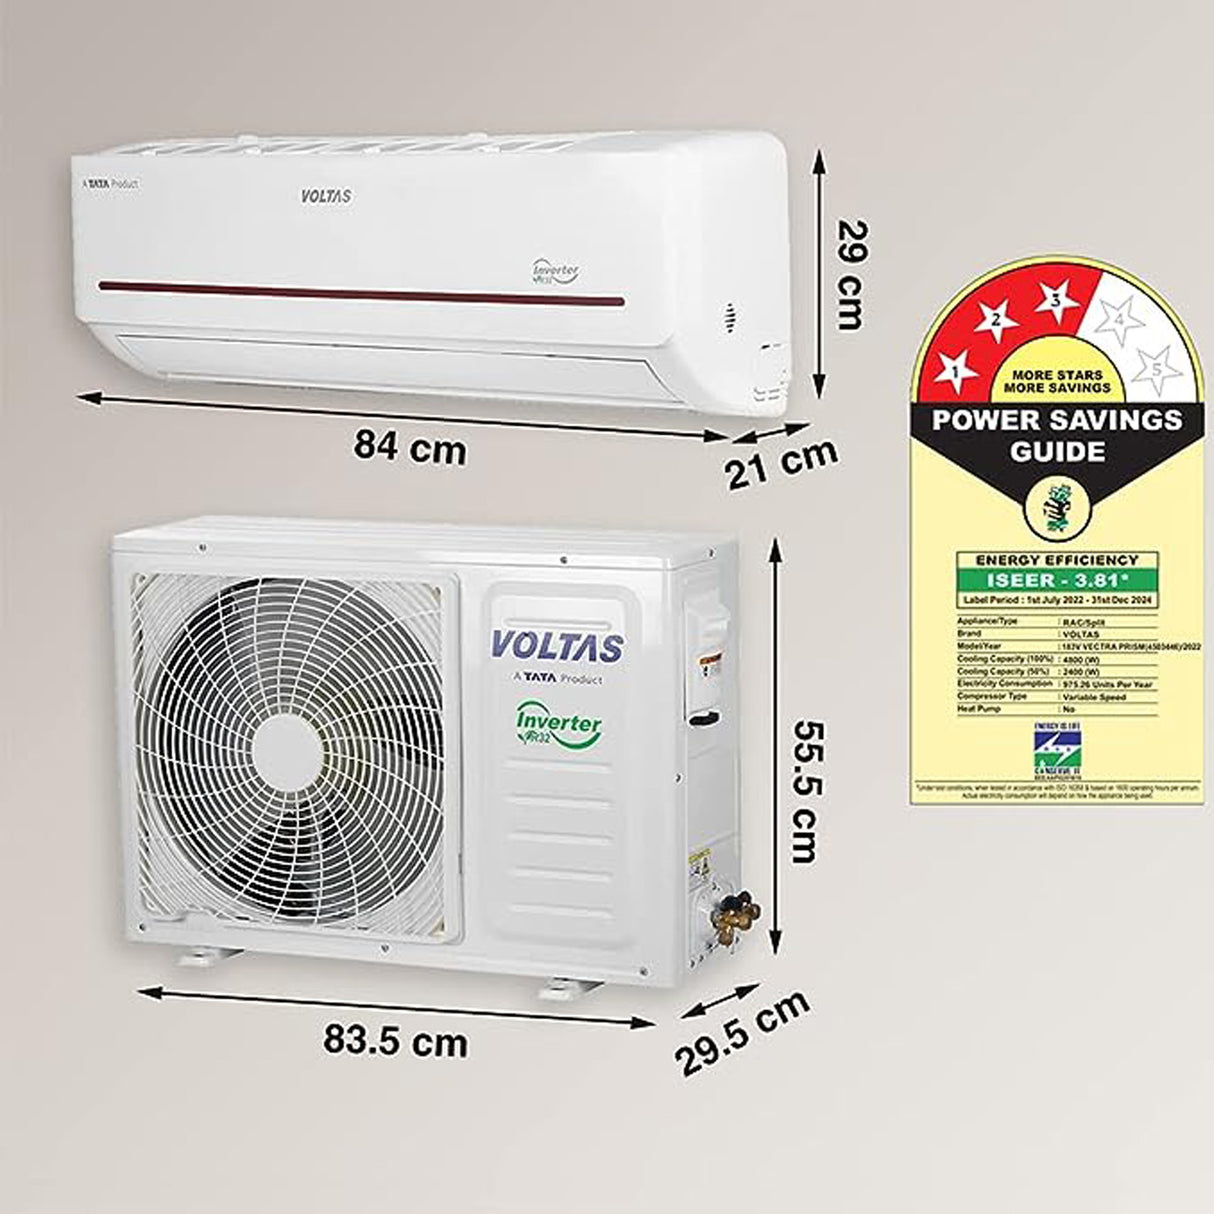 Advanced HVAC Technology: Voltas Inverter AC with Copper Coil, 3 Star Rating